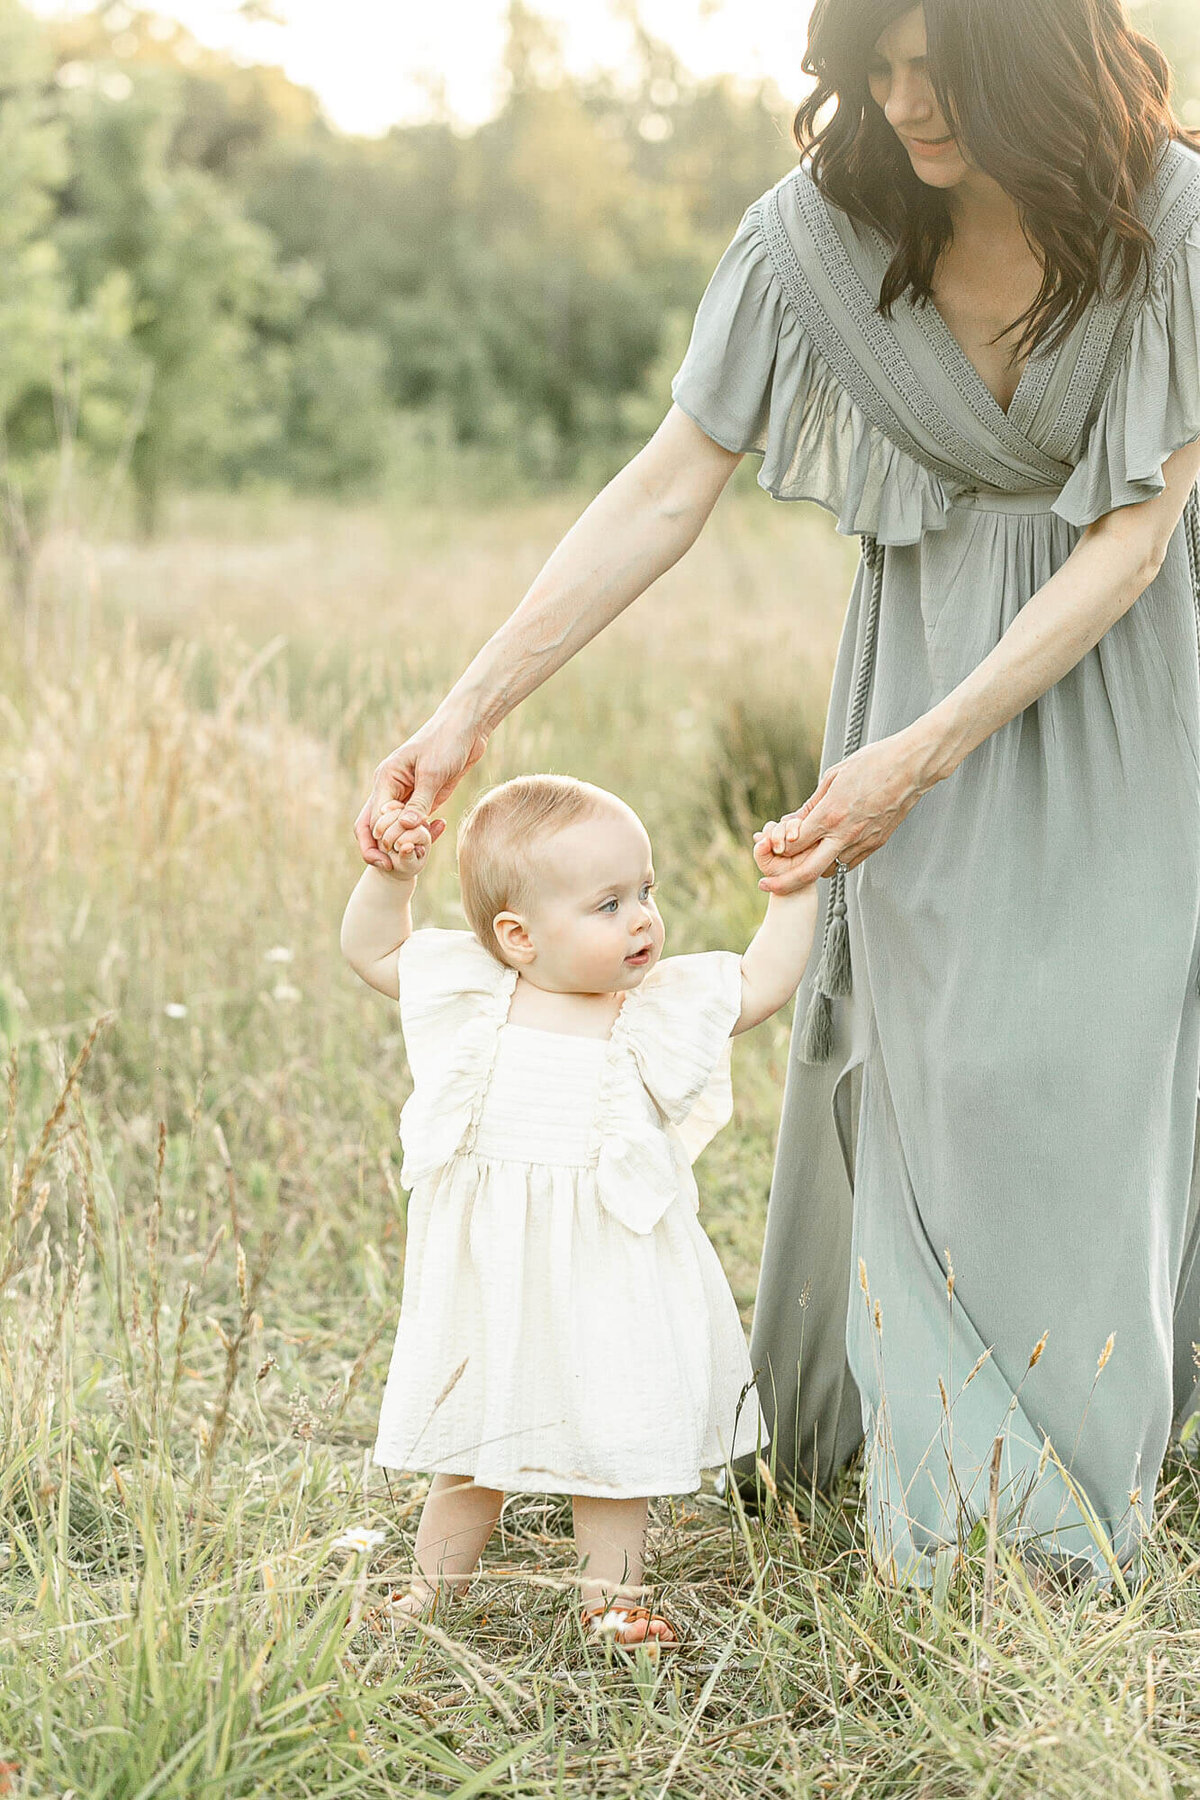 Baby Girl just learning how to walk is dressed in a cute cream colored dress and brown sandals and is holding onto Mama's hands. Mama is wearing a sage green dress. They are standing out in a field of tall golden grasses during summertime at sunset.